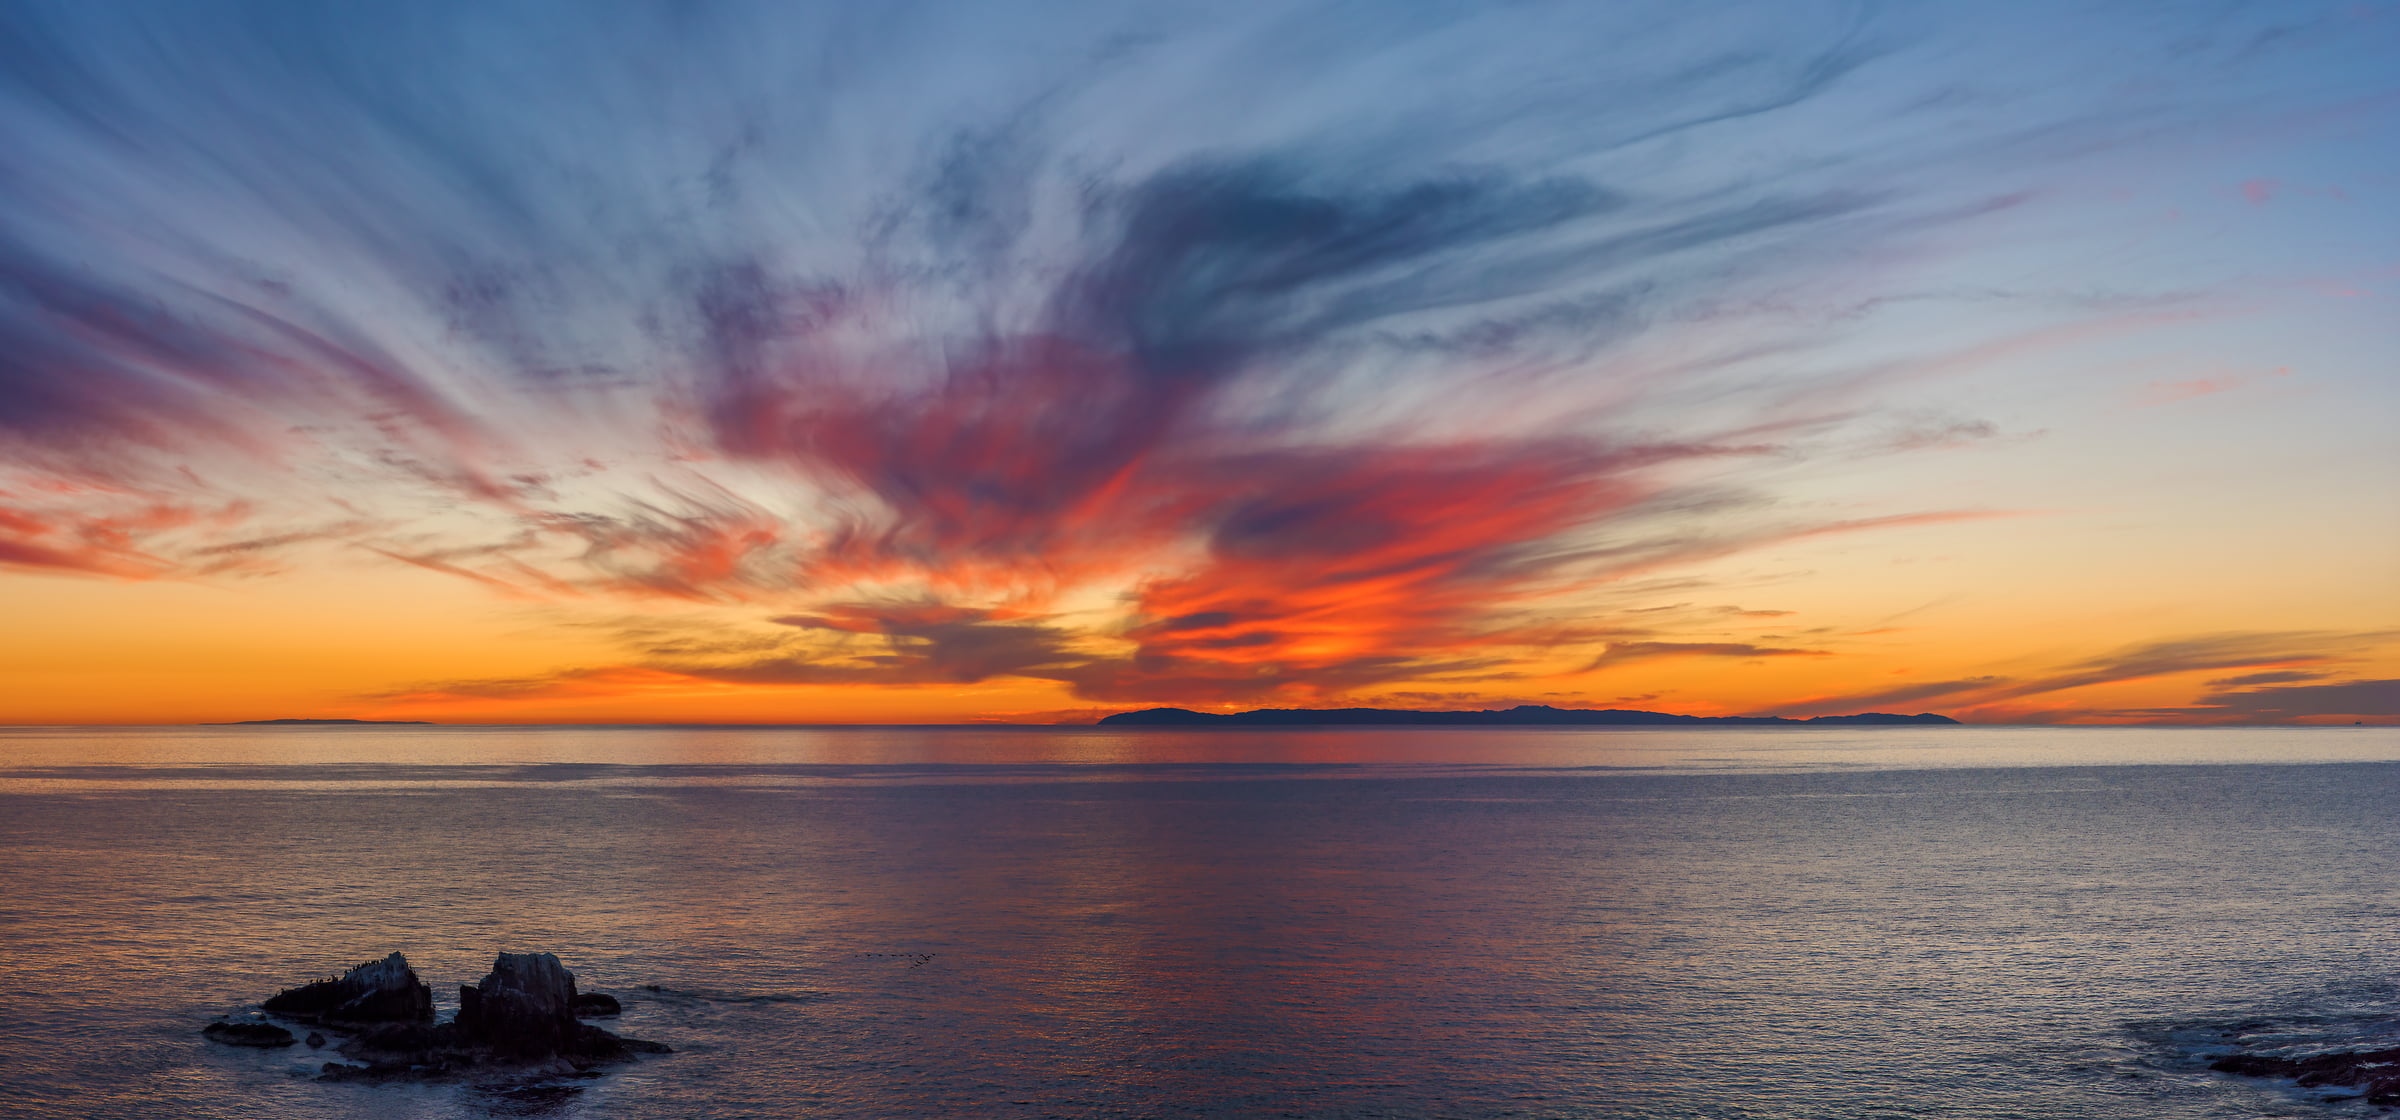 176 megapixels! A very high resolution, large-format VAST photo of a beautiful sunset over the ocean; created by Jim Tarpo in Laguna Beach, California.